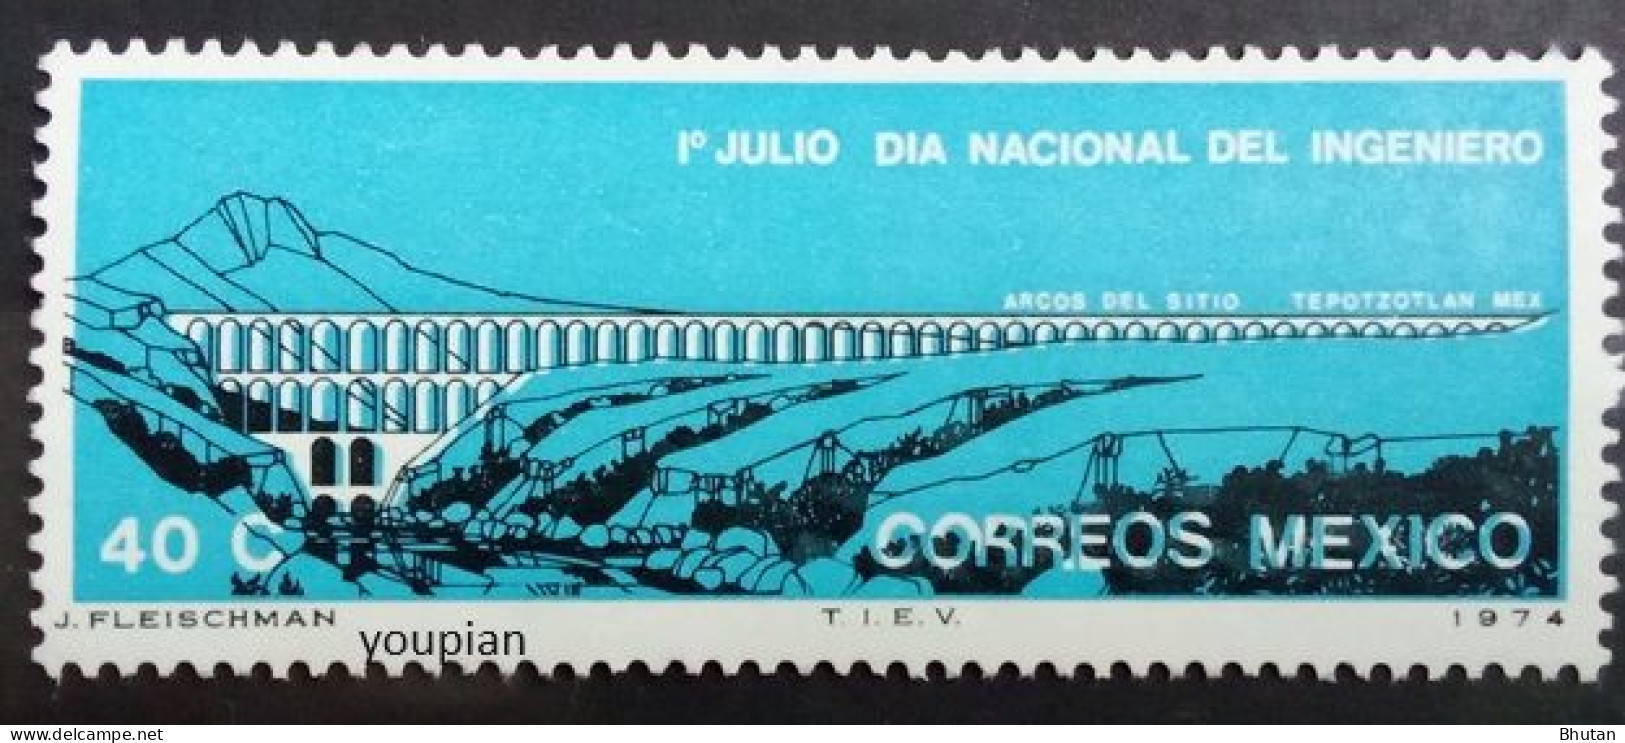 Mexico 1974, Day Of The Engineer, MNH Single Stamp - México